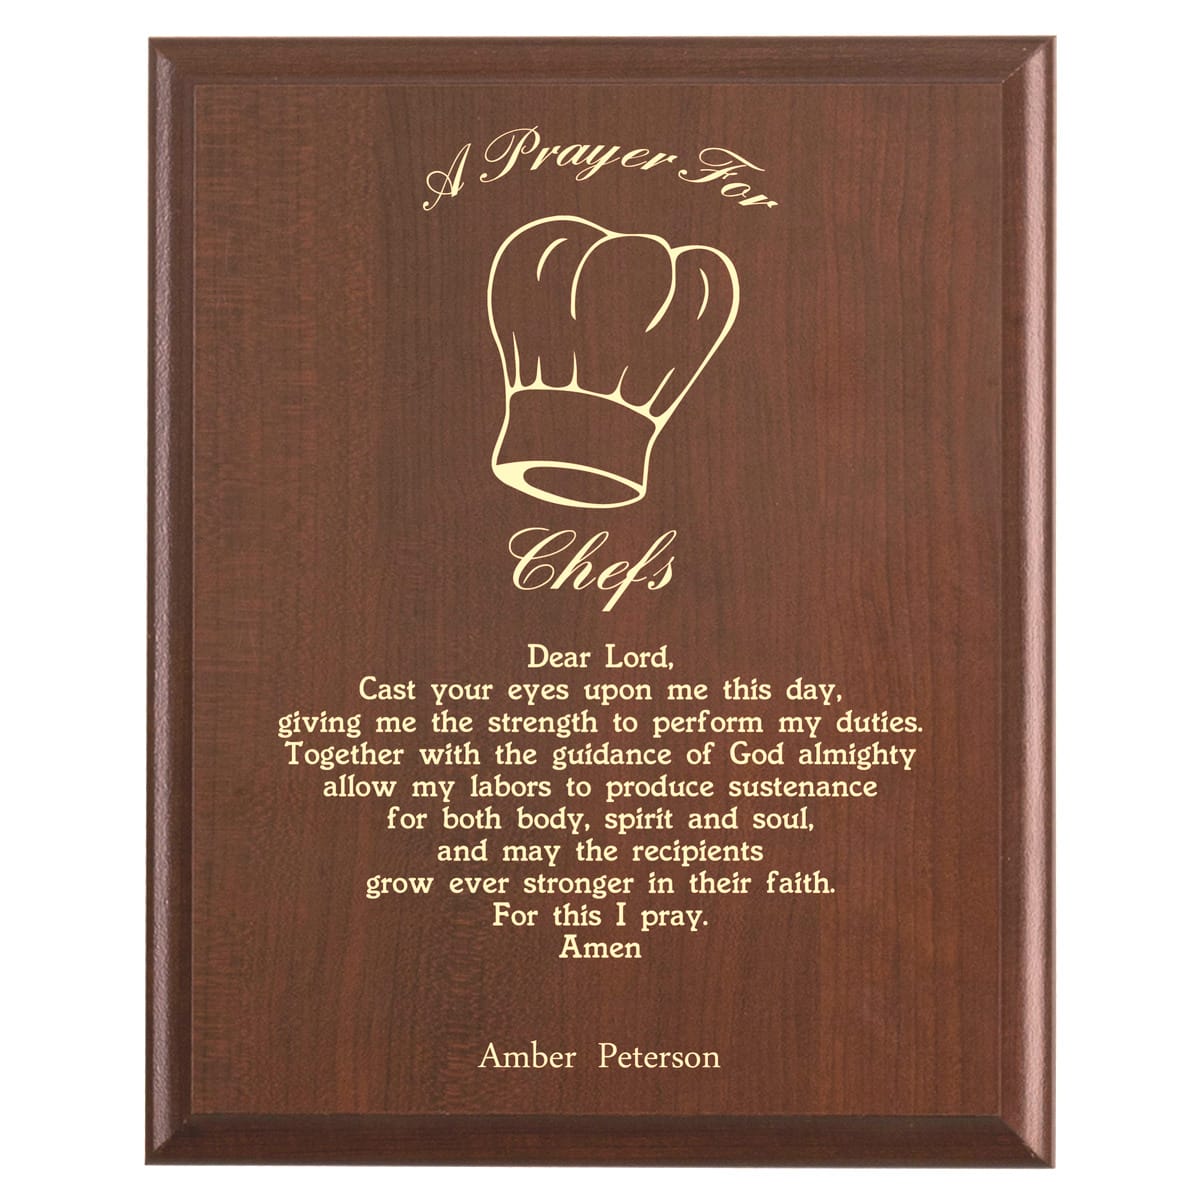 Plaque photo: Chef Prayer Plaque design with free personalization. Wood style finish with customized text.